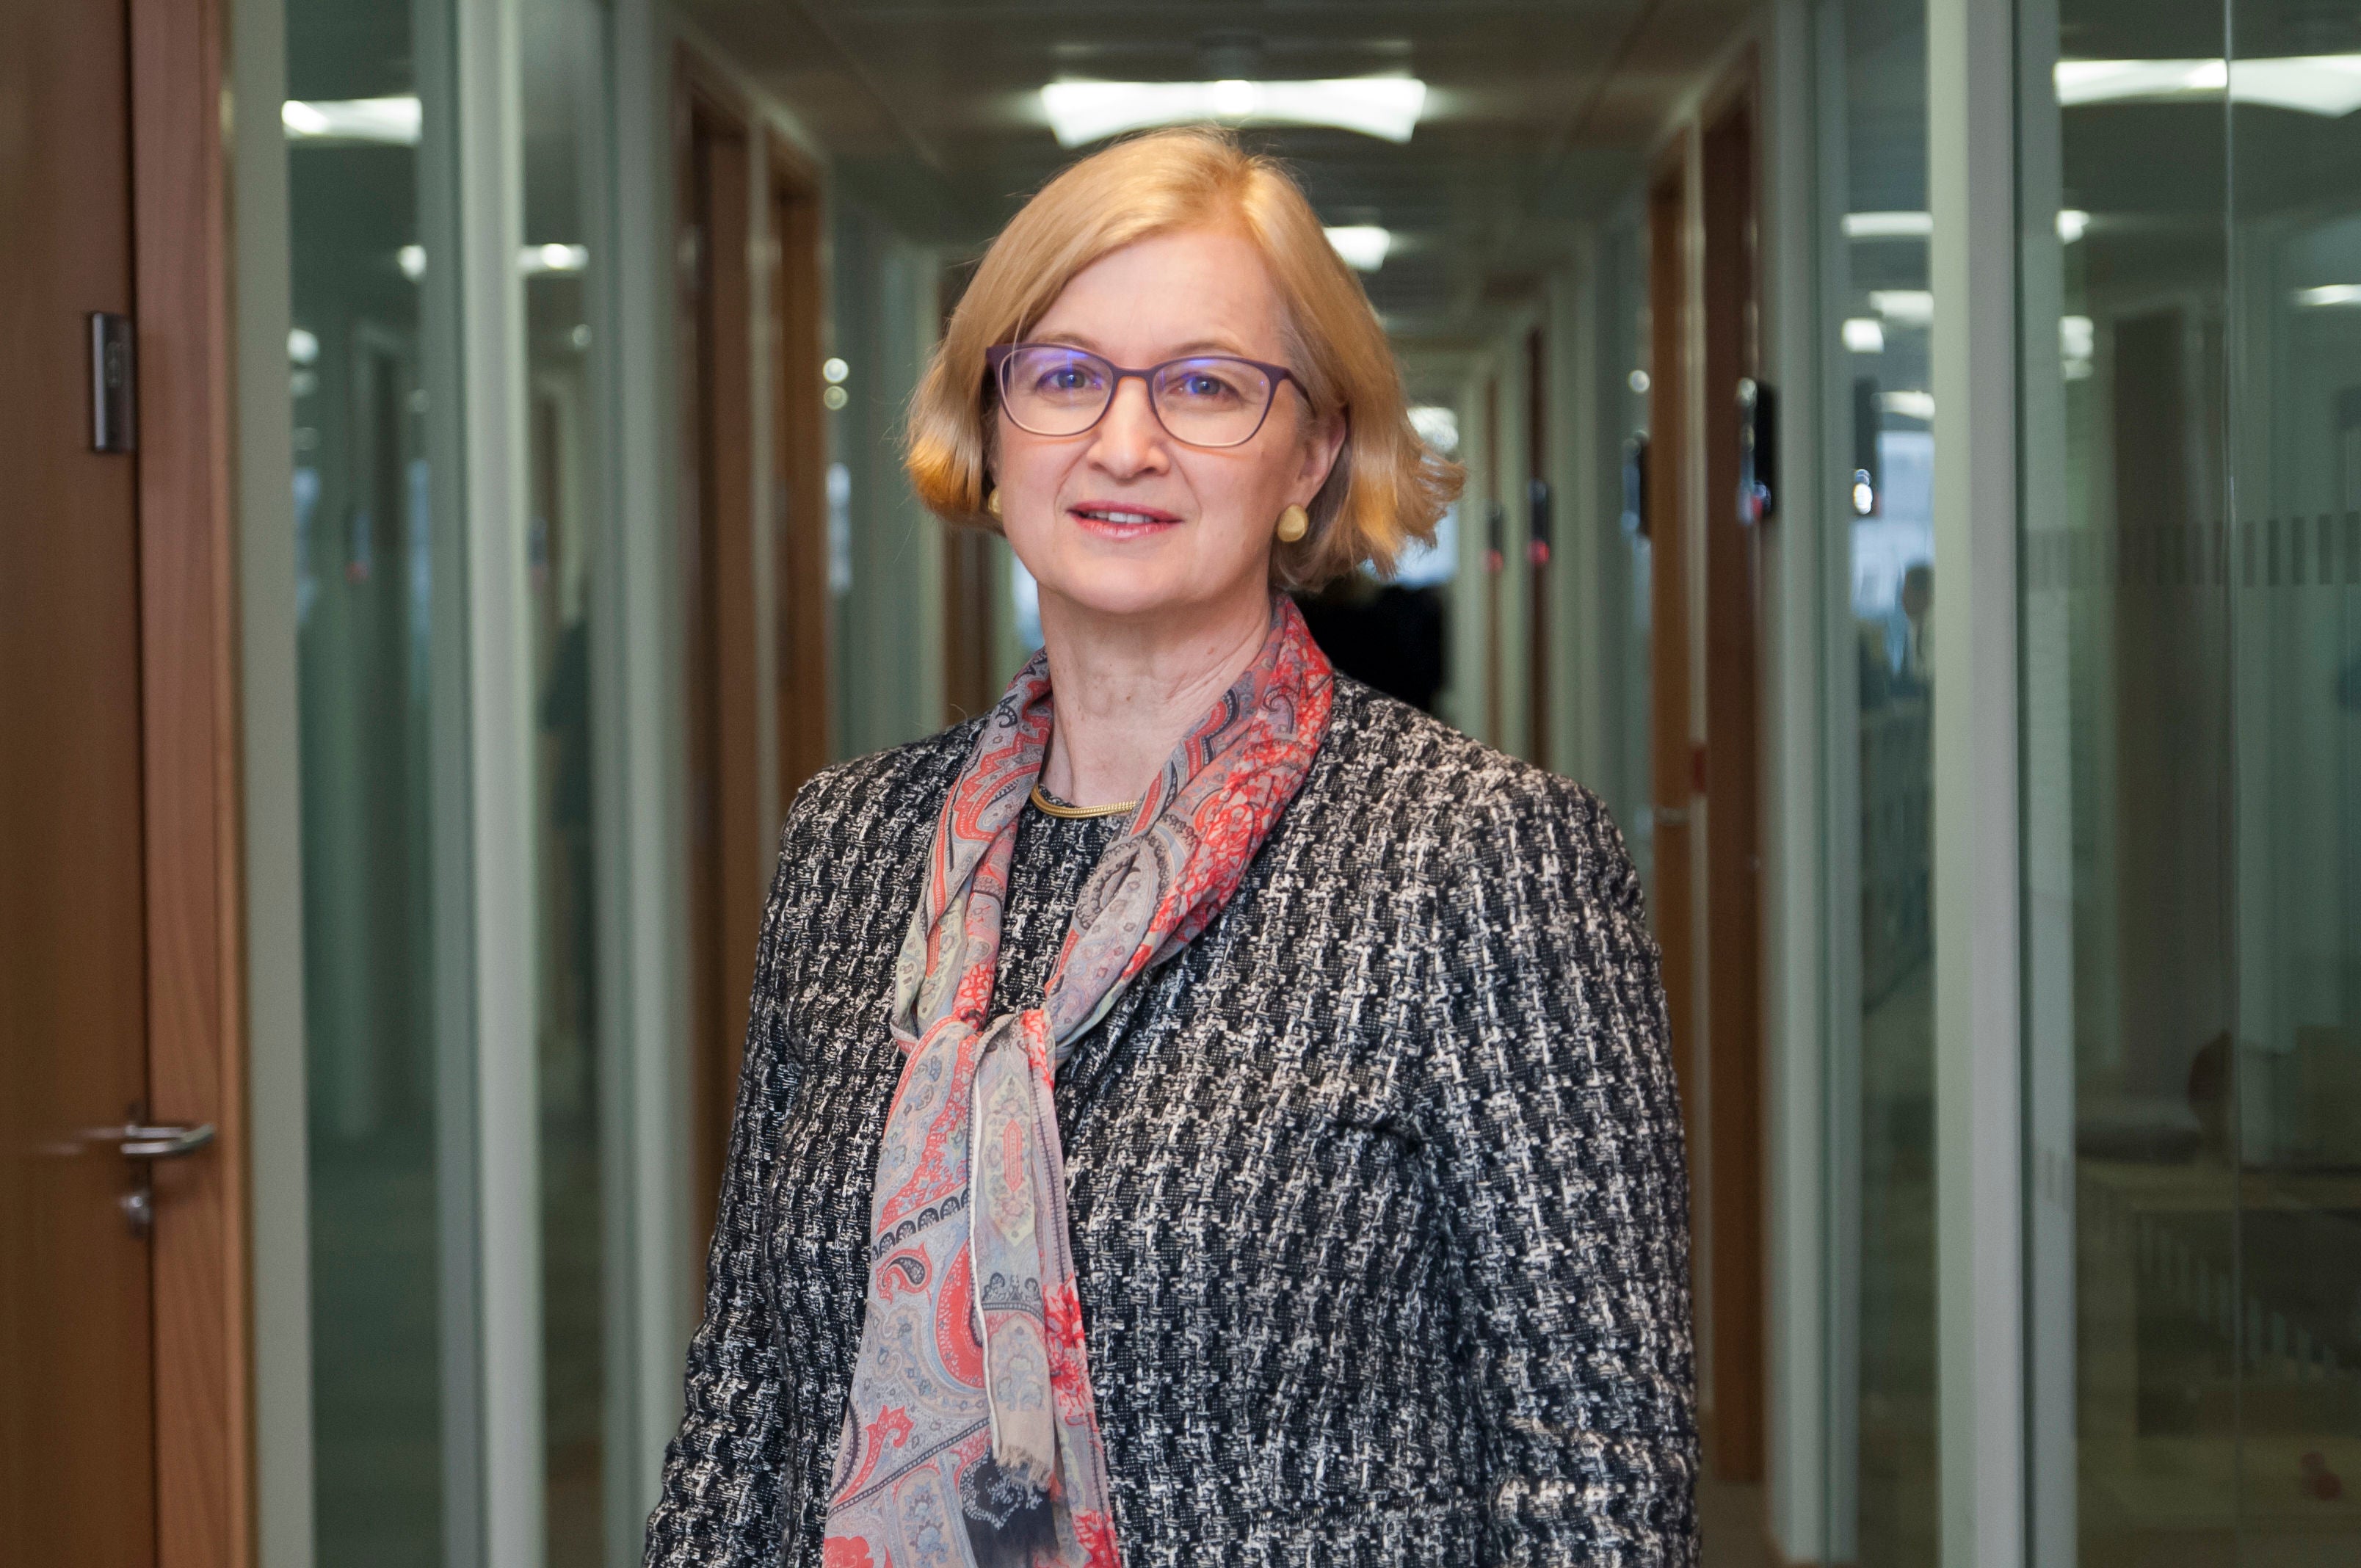 Ofsted chief inspector Amanda Spielman said there is ‘no doubt that schools continue to face some very tricky challenges around pupil attendance’ (Ofsted/PA)